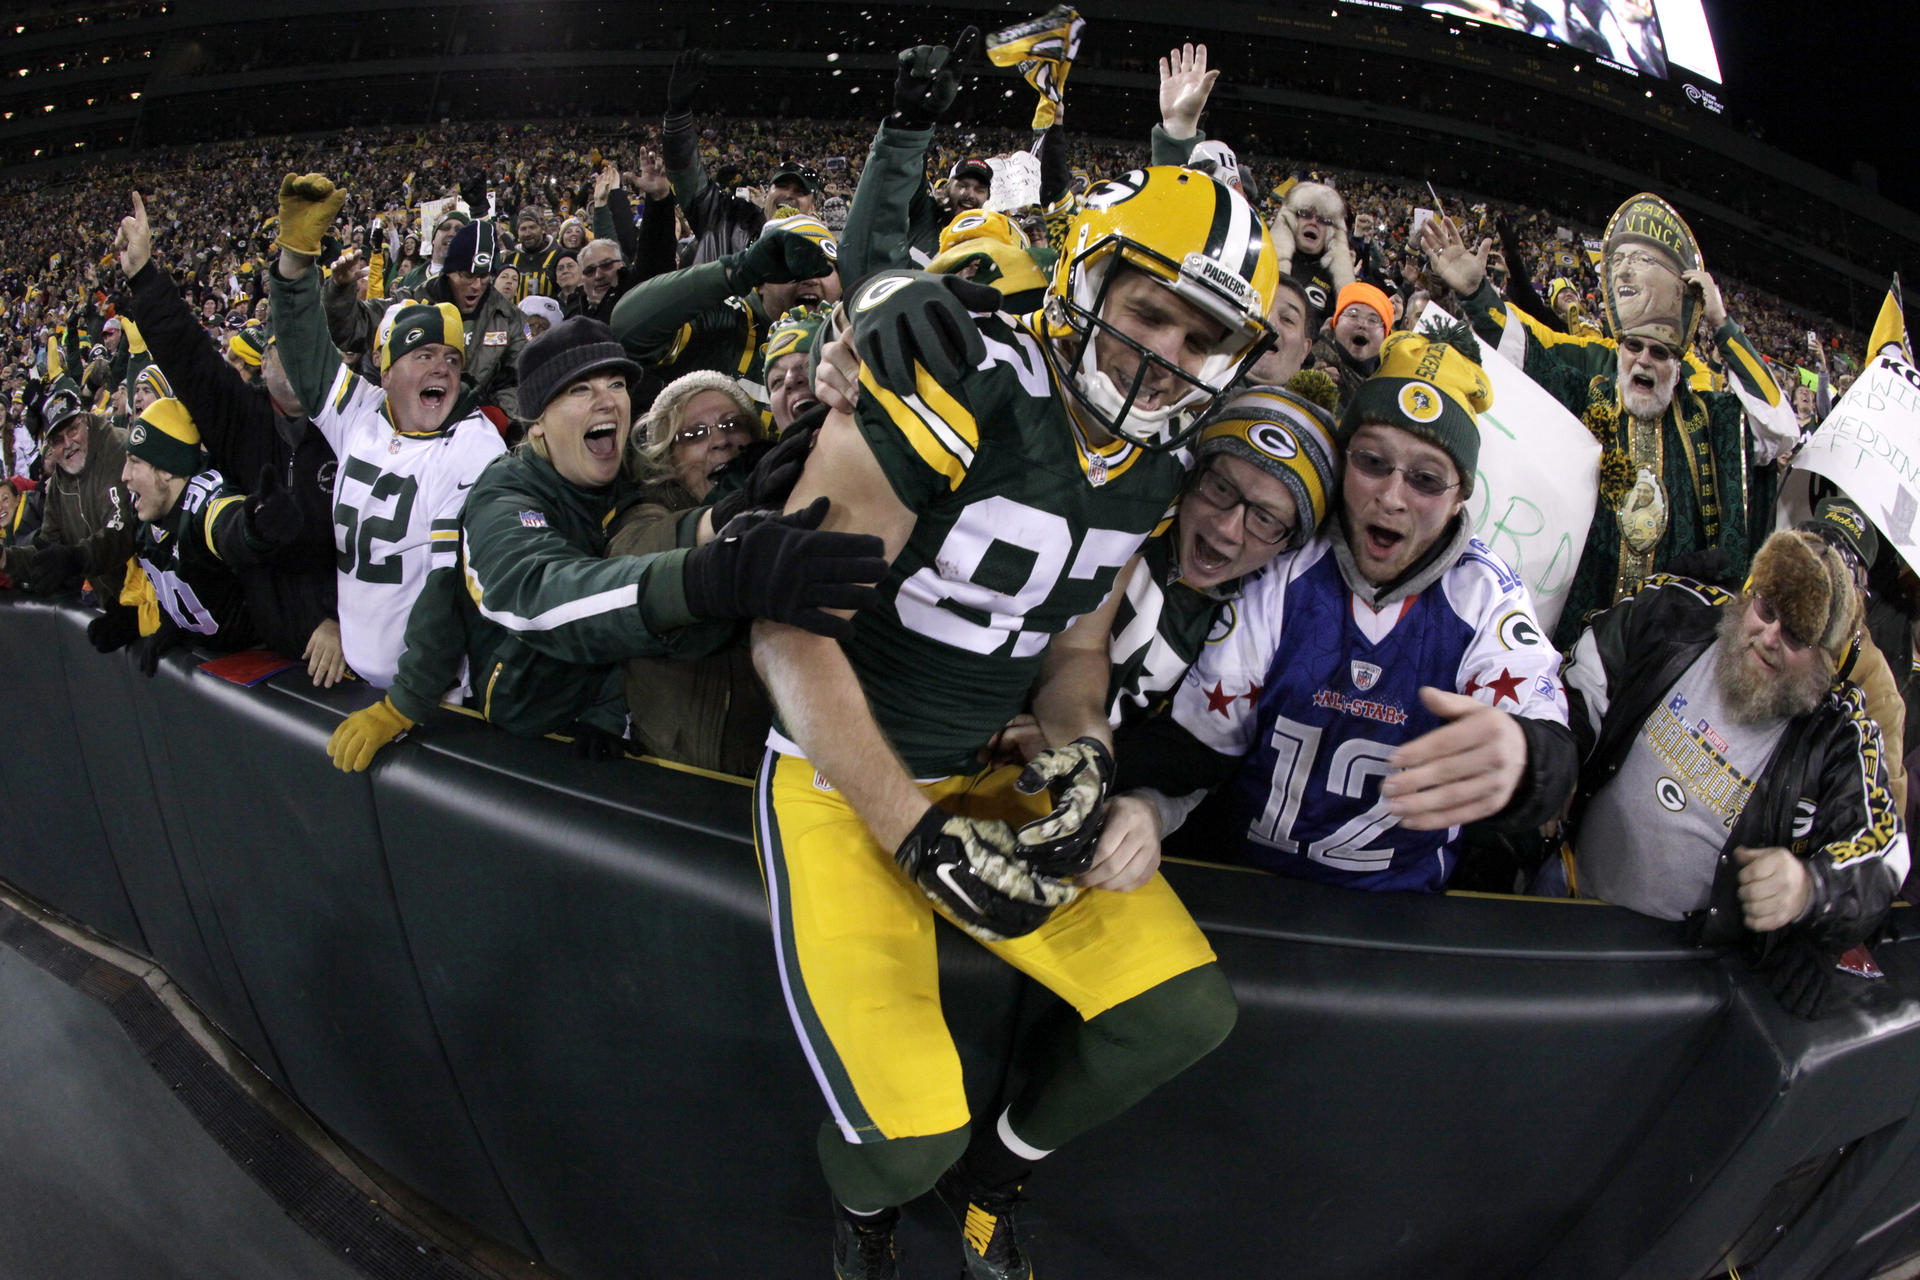 Green Bay Packers wide receiver Jordy Nelson celebrates a touchdown with fans during their game against the Chicago Bears. Photo: AP